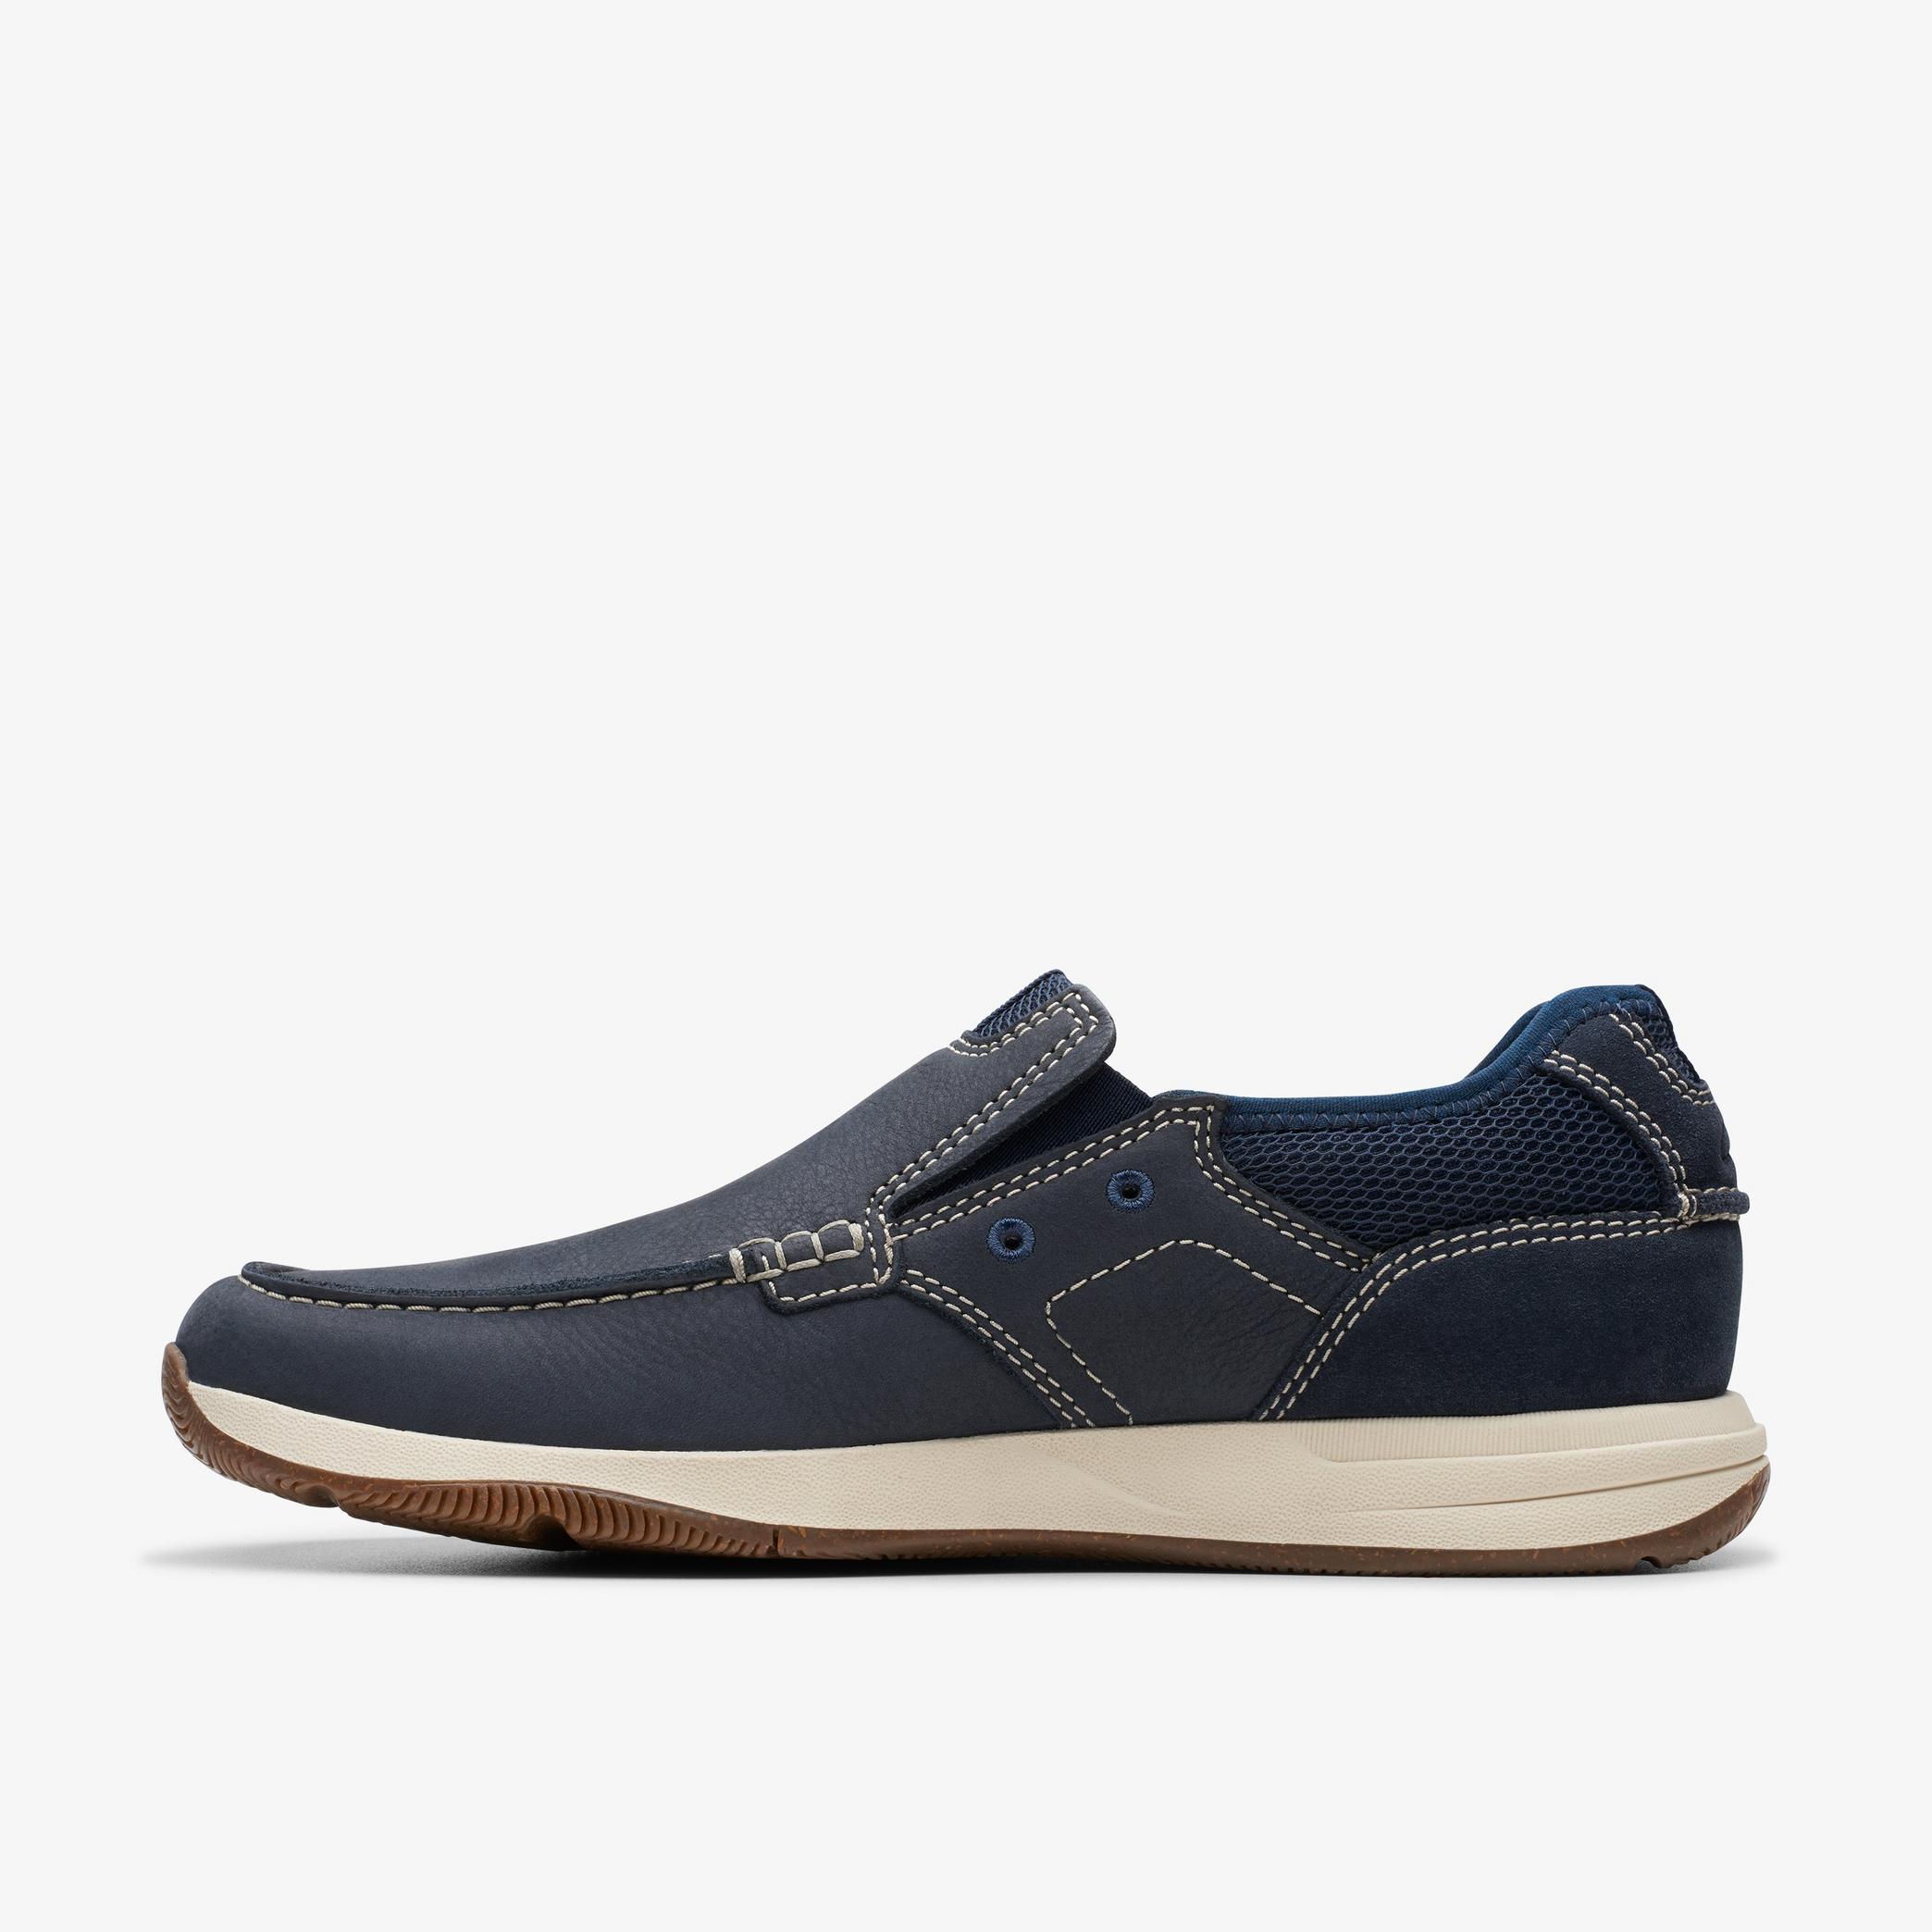 Sailview Step Navy Nubuck Boat Shoes, view 2 of 6